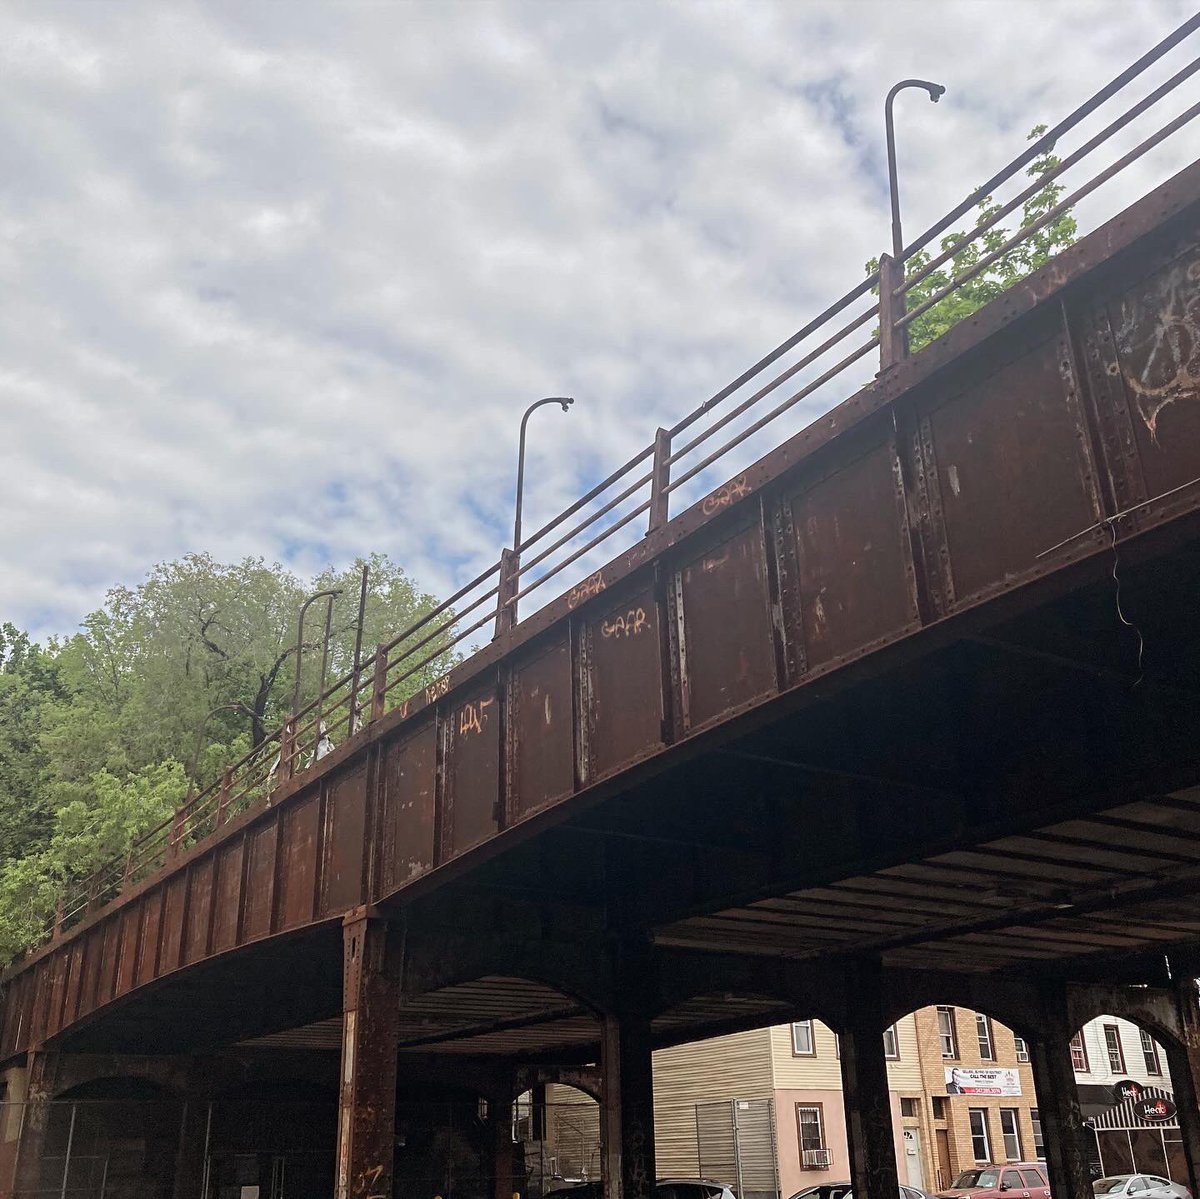 Took a #Janeswalk tour of the abandoned Rockaway Branch line which @thequeenslink is working to turn into rails & trails to connect QueensBlvd to Rockaways 🏄‍♂️ hey @mta make it happen!